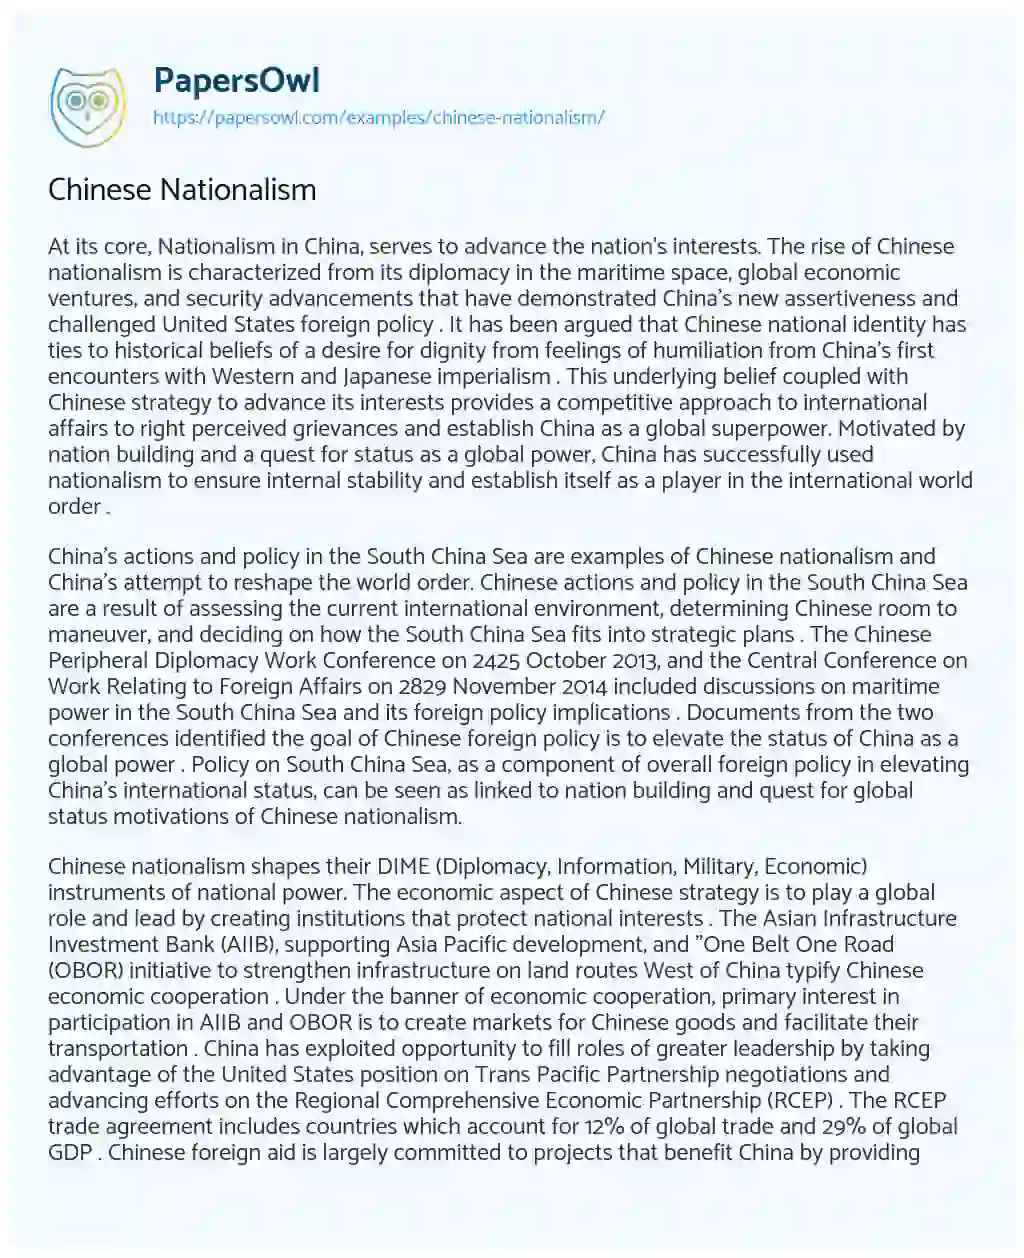 Essay on Chinese Nationalism